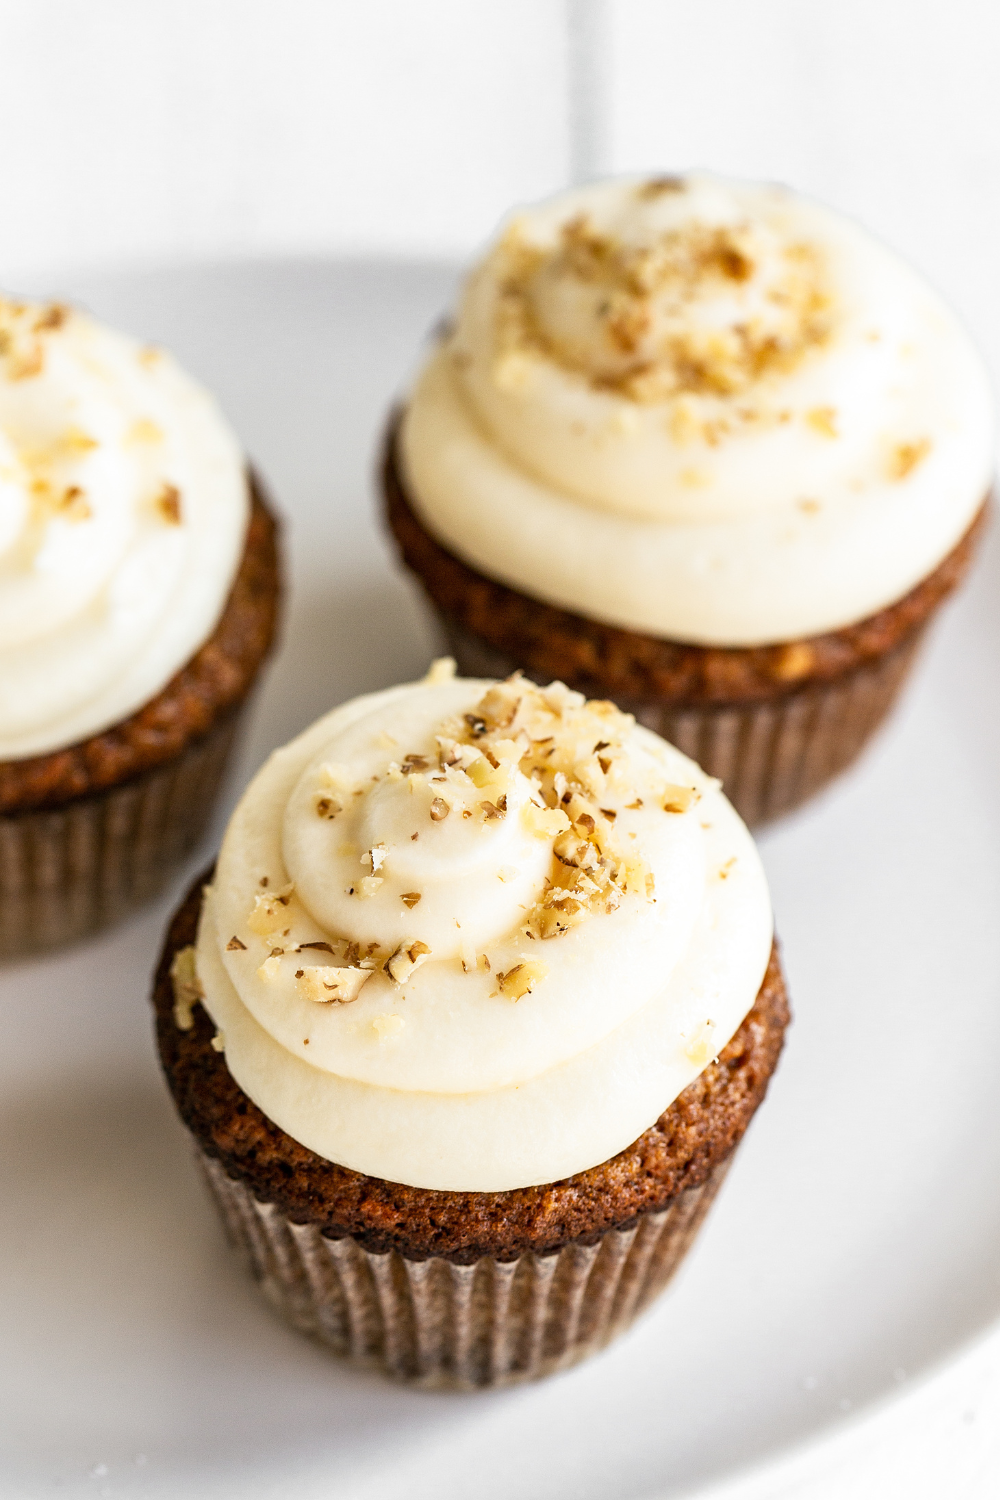 perfect Carrot Cake Cupcake with cream cheese frosting, with chopped walnuts on top, ready to serve.